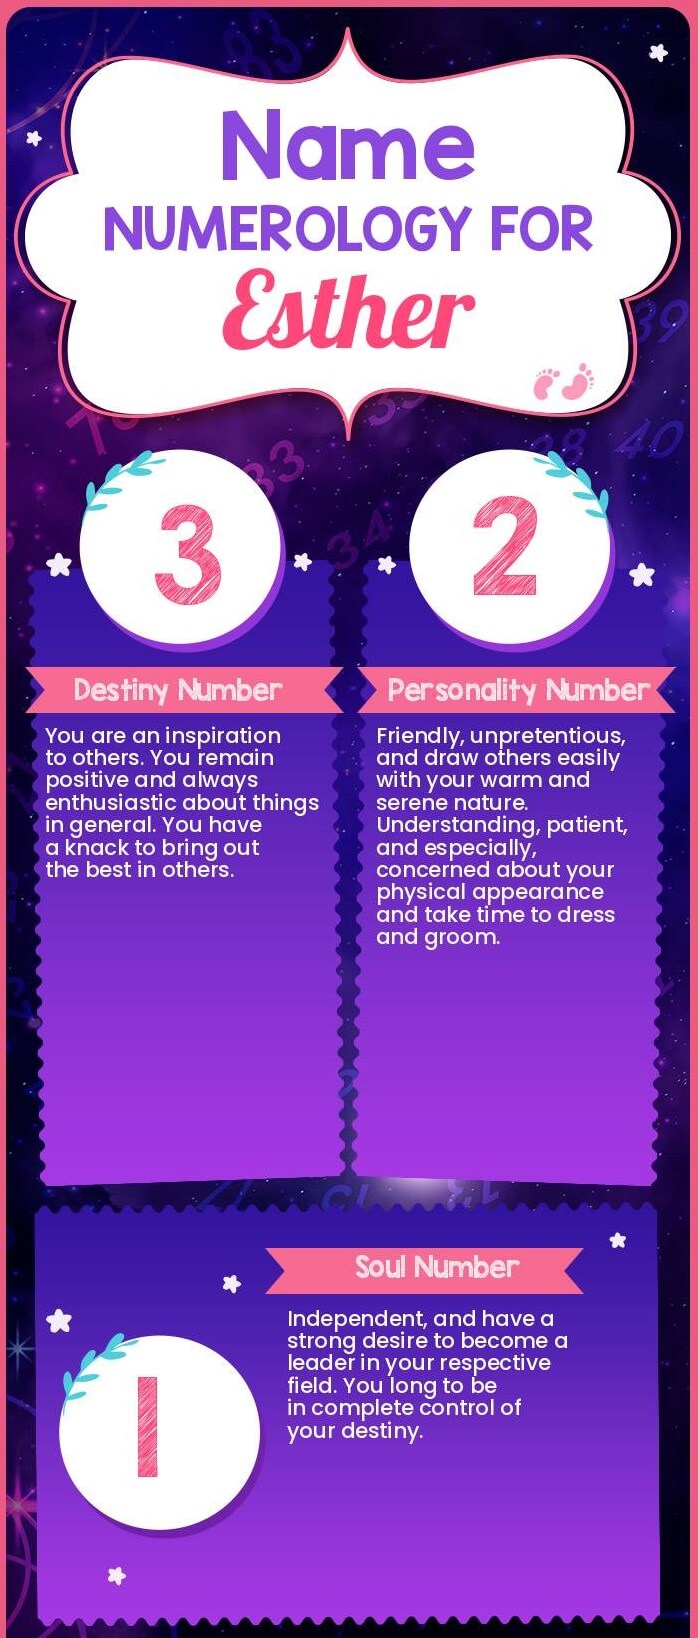 Name Numerology For Esther